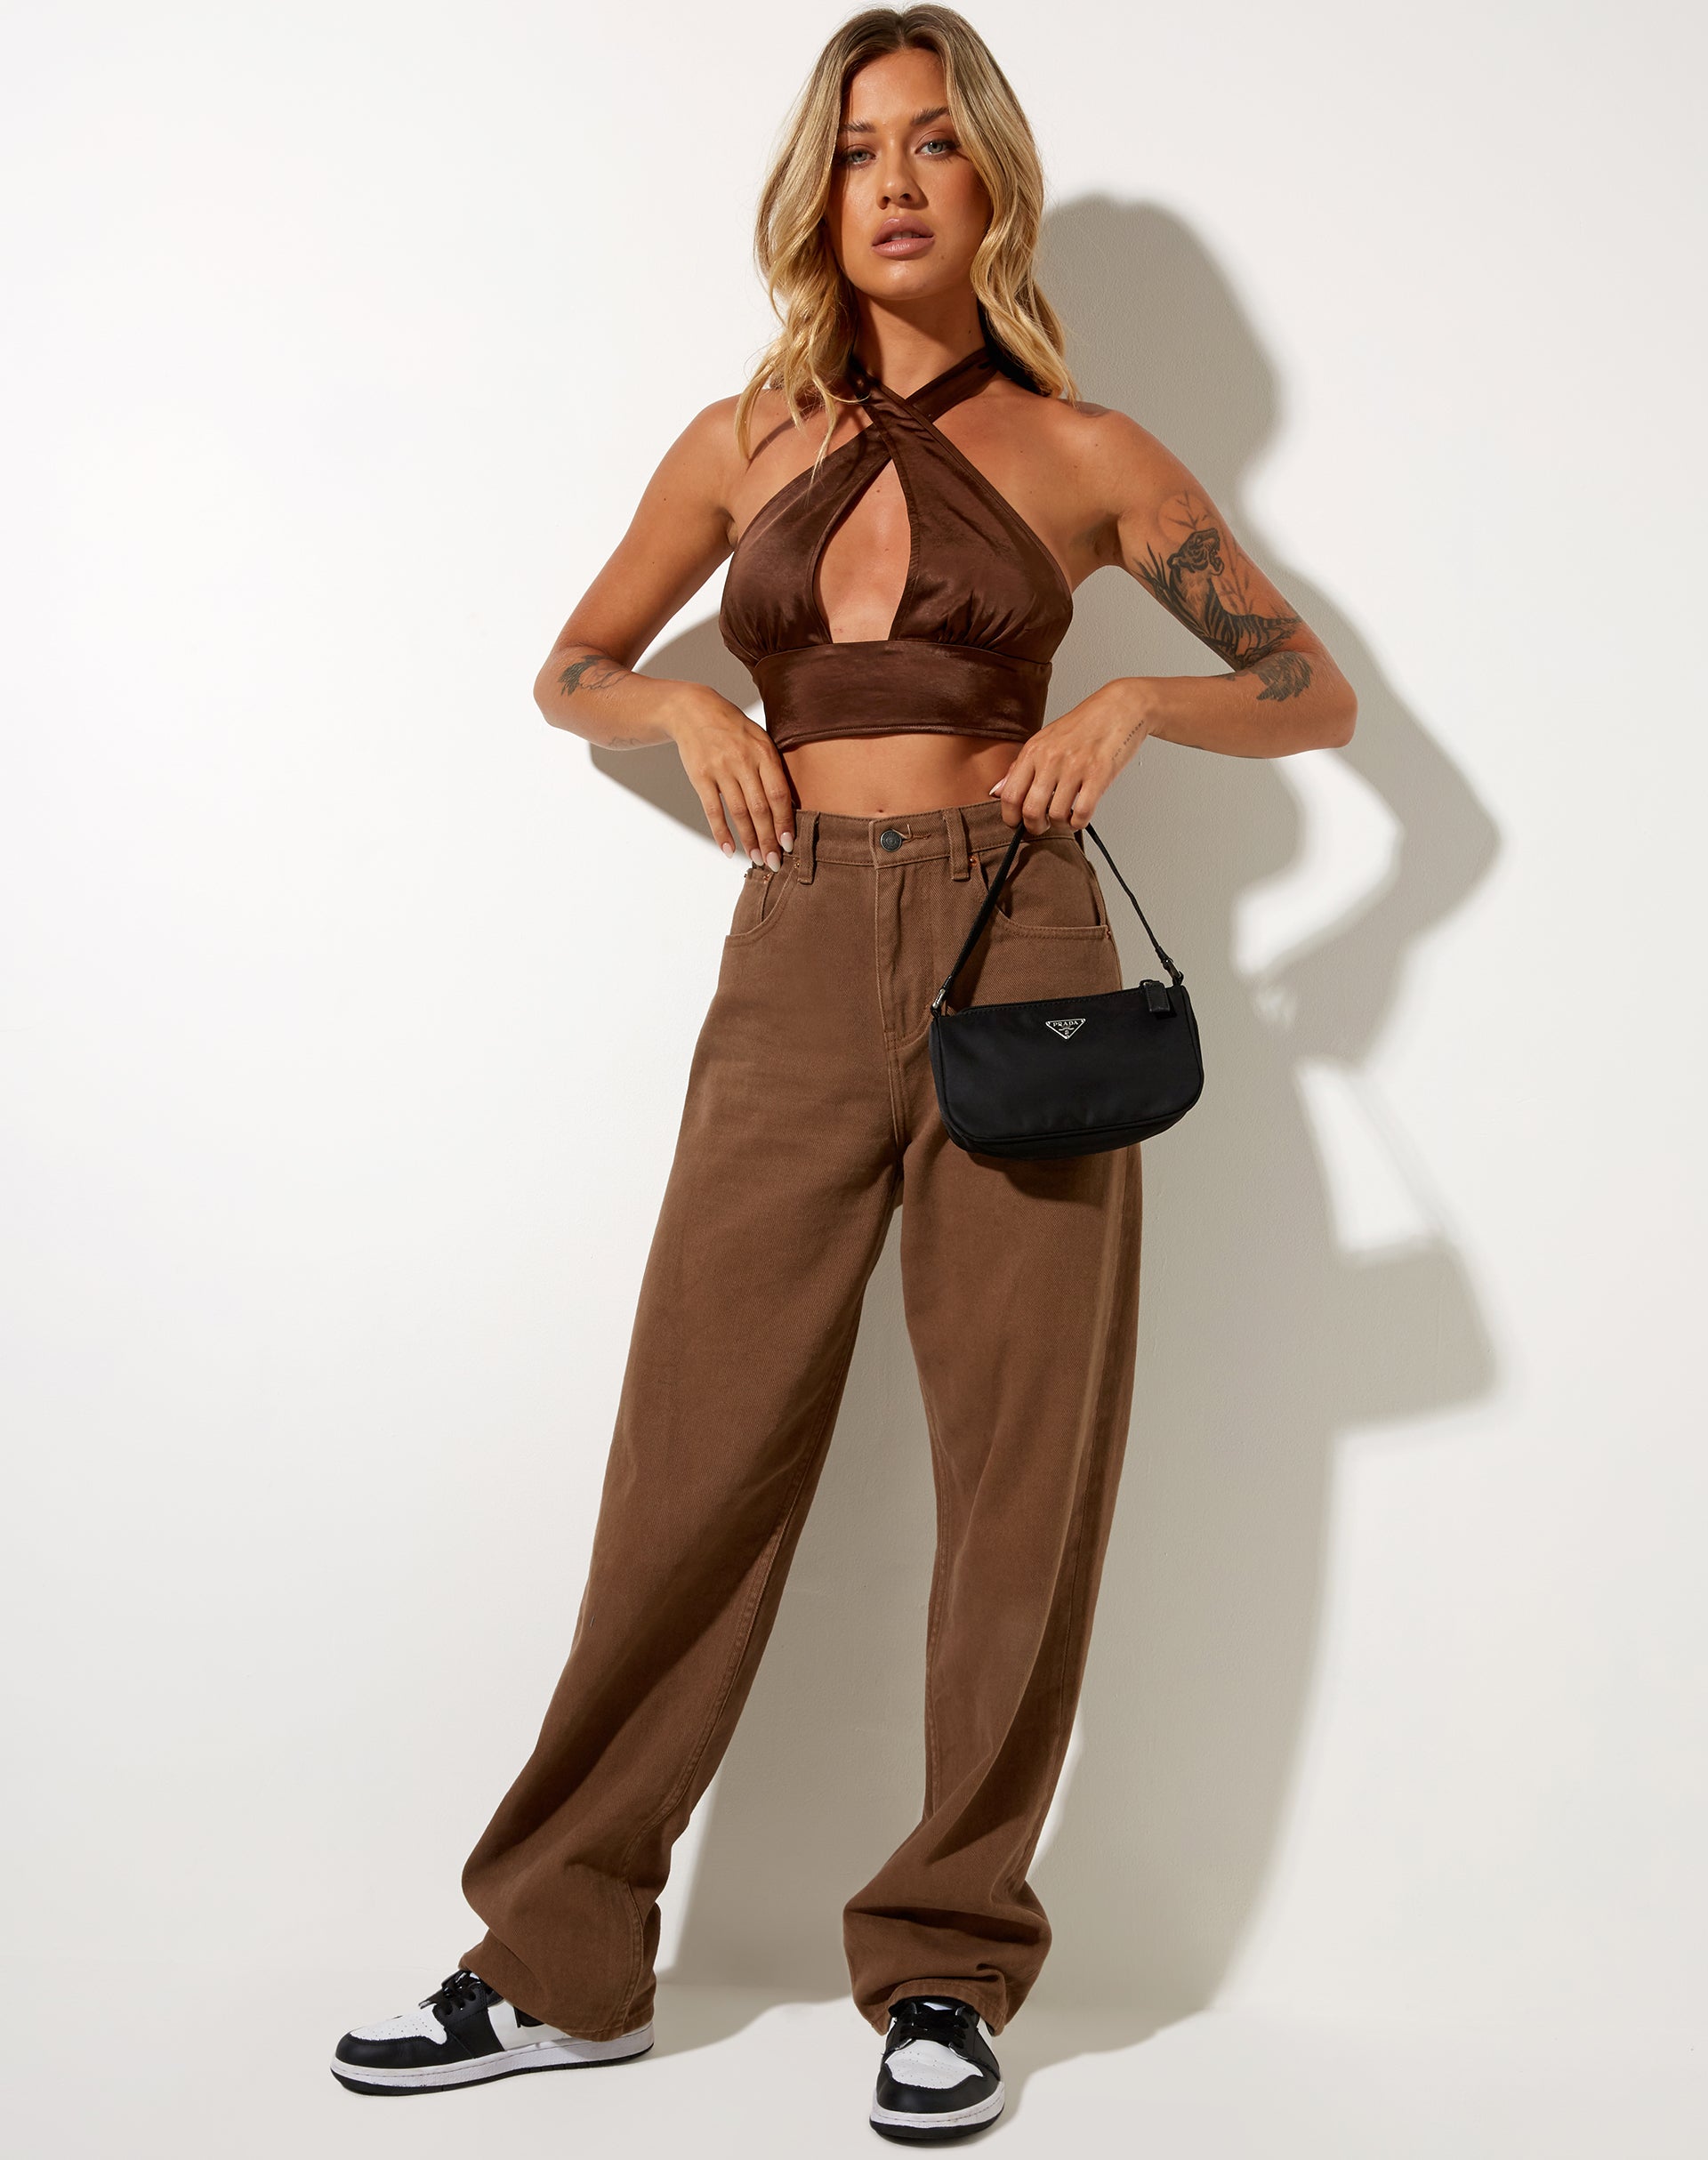 Image of Silta Crop Top in Satin Chocolate